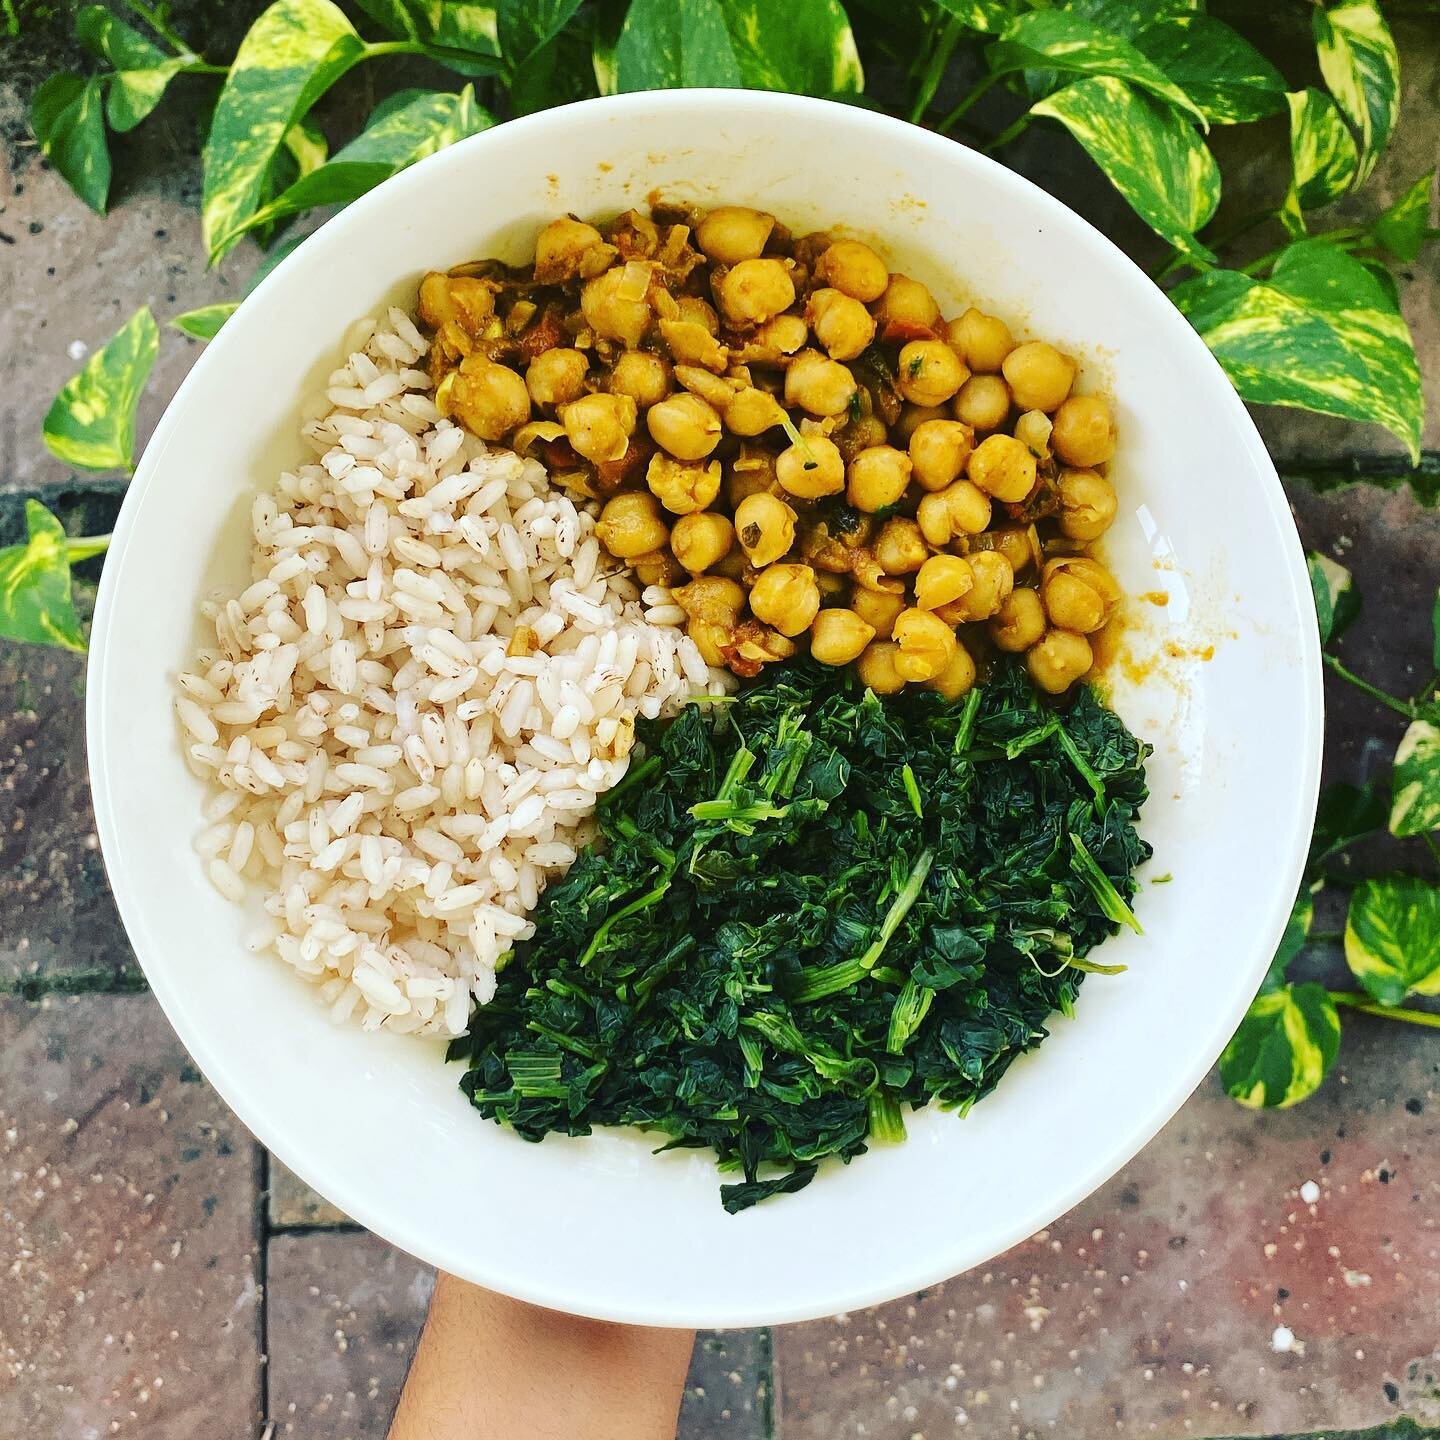 Another day, another legume 🫘 

I cooked the rice (Kerala matta rice) in my instant pot, so I have it for a few days. 

Spinach was bought frozen, saut&eacute;ed with water for a few minutes.

The delicious chickpea curry was made for me by my wonde